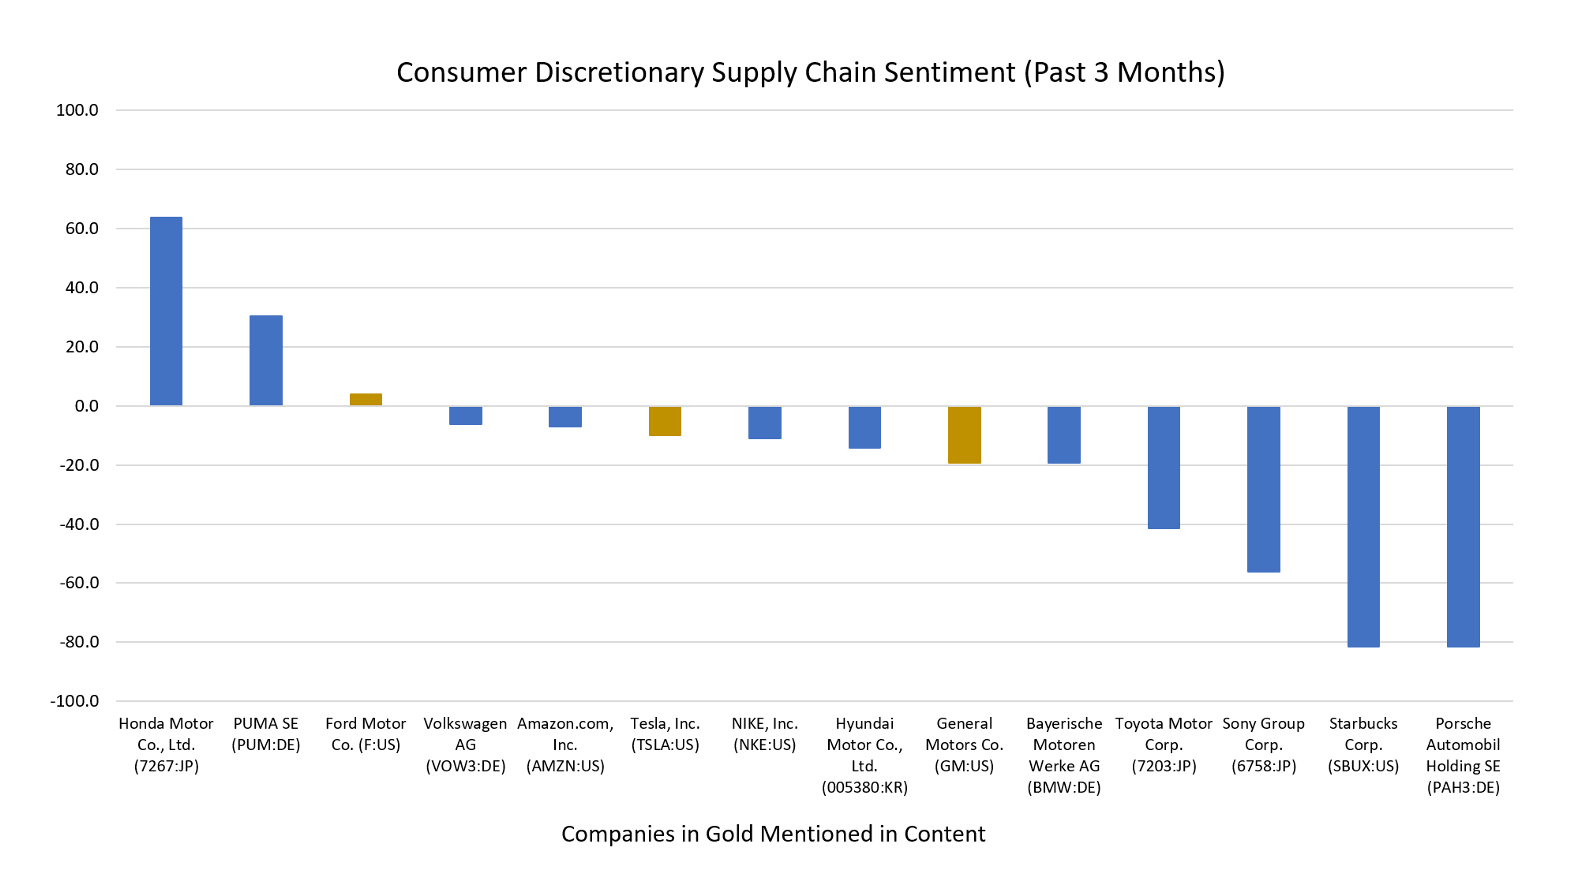 ESG Supply Chain Sentiment in the News